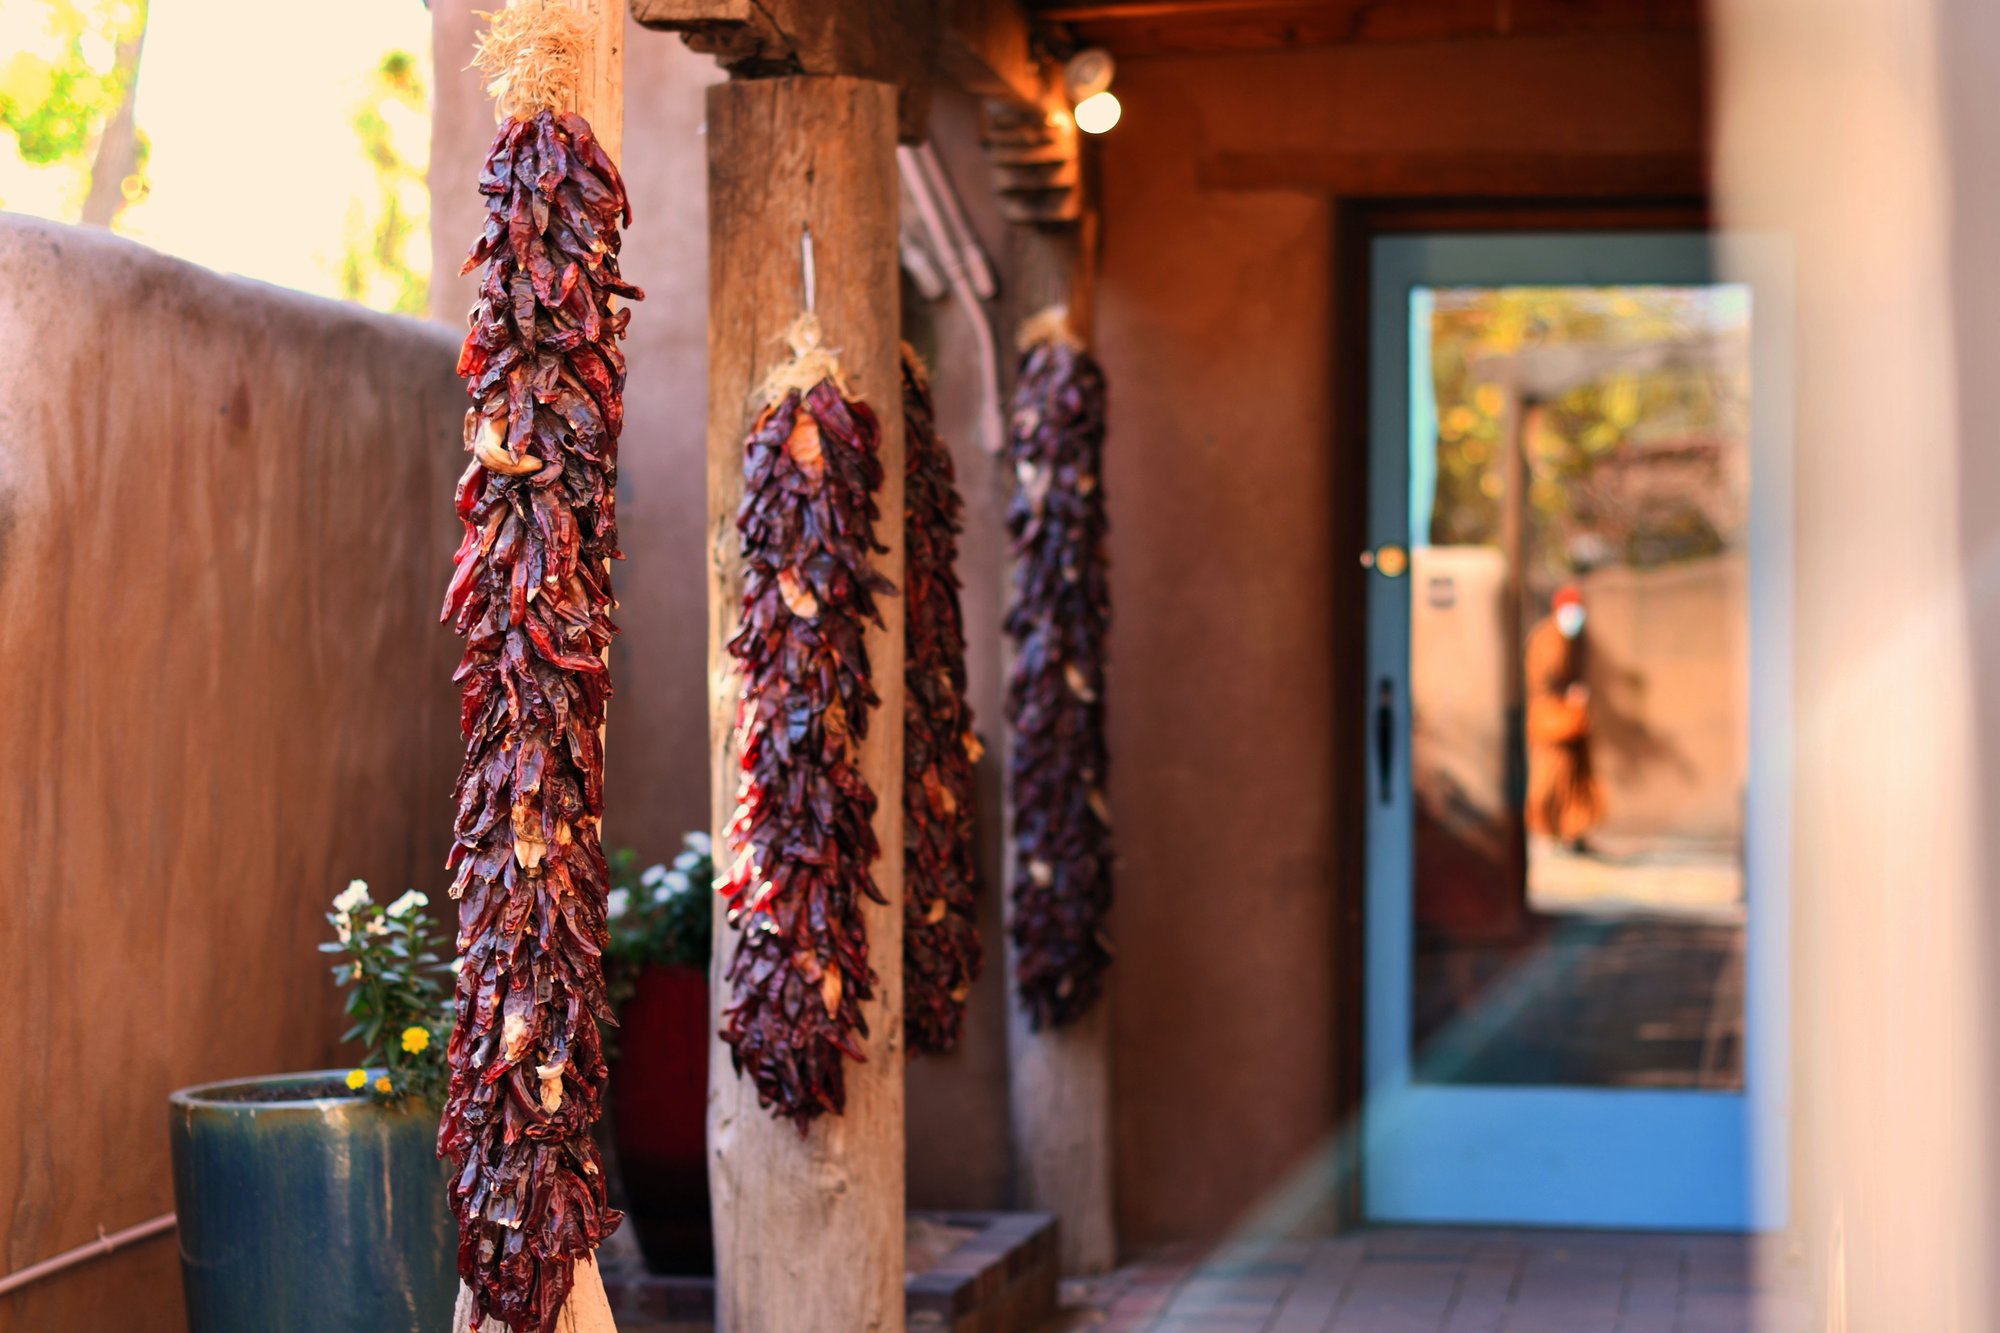 Chili peppers in Santa Fe, New Mexico.